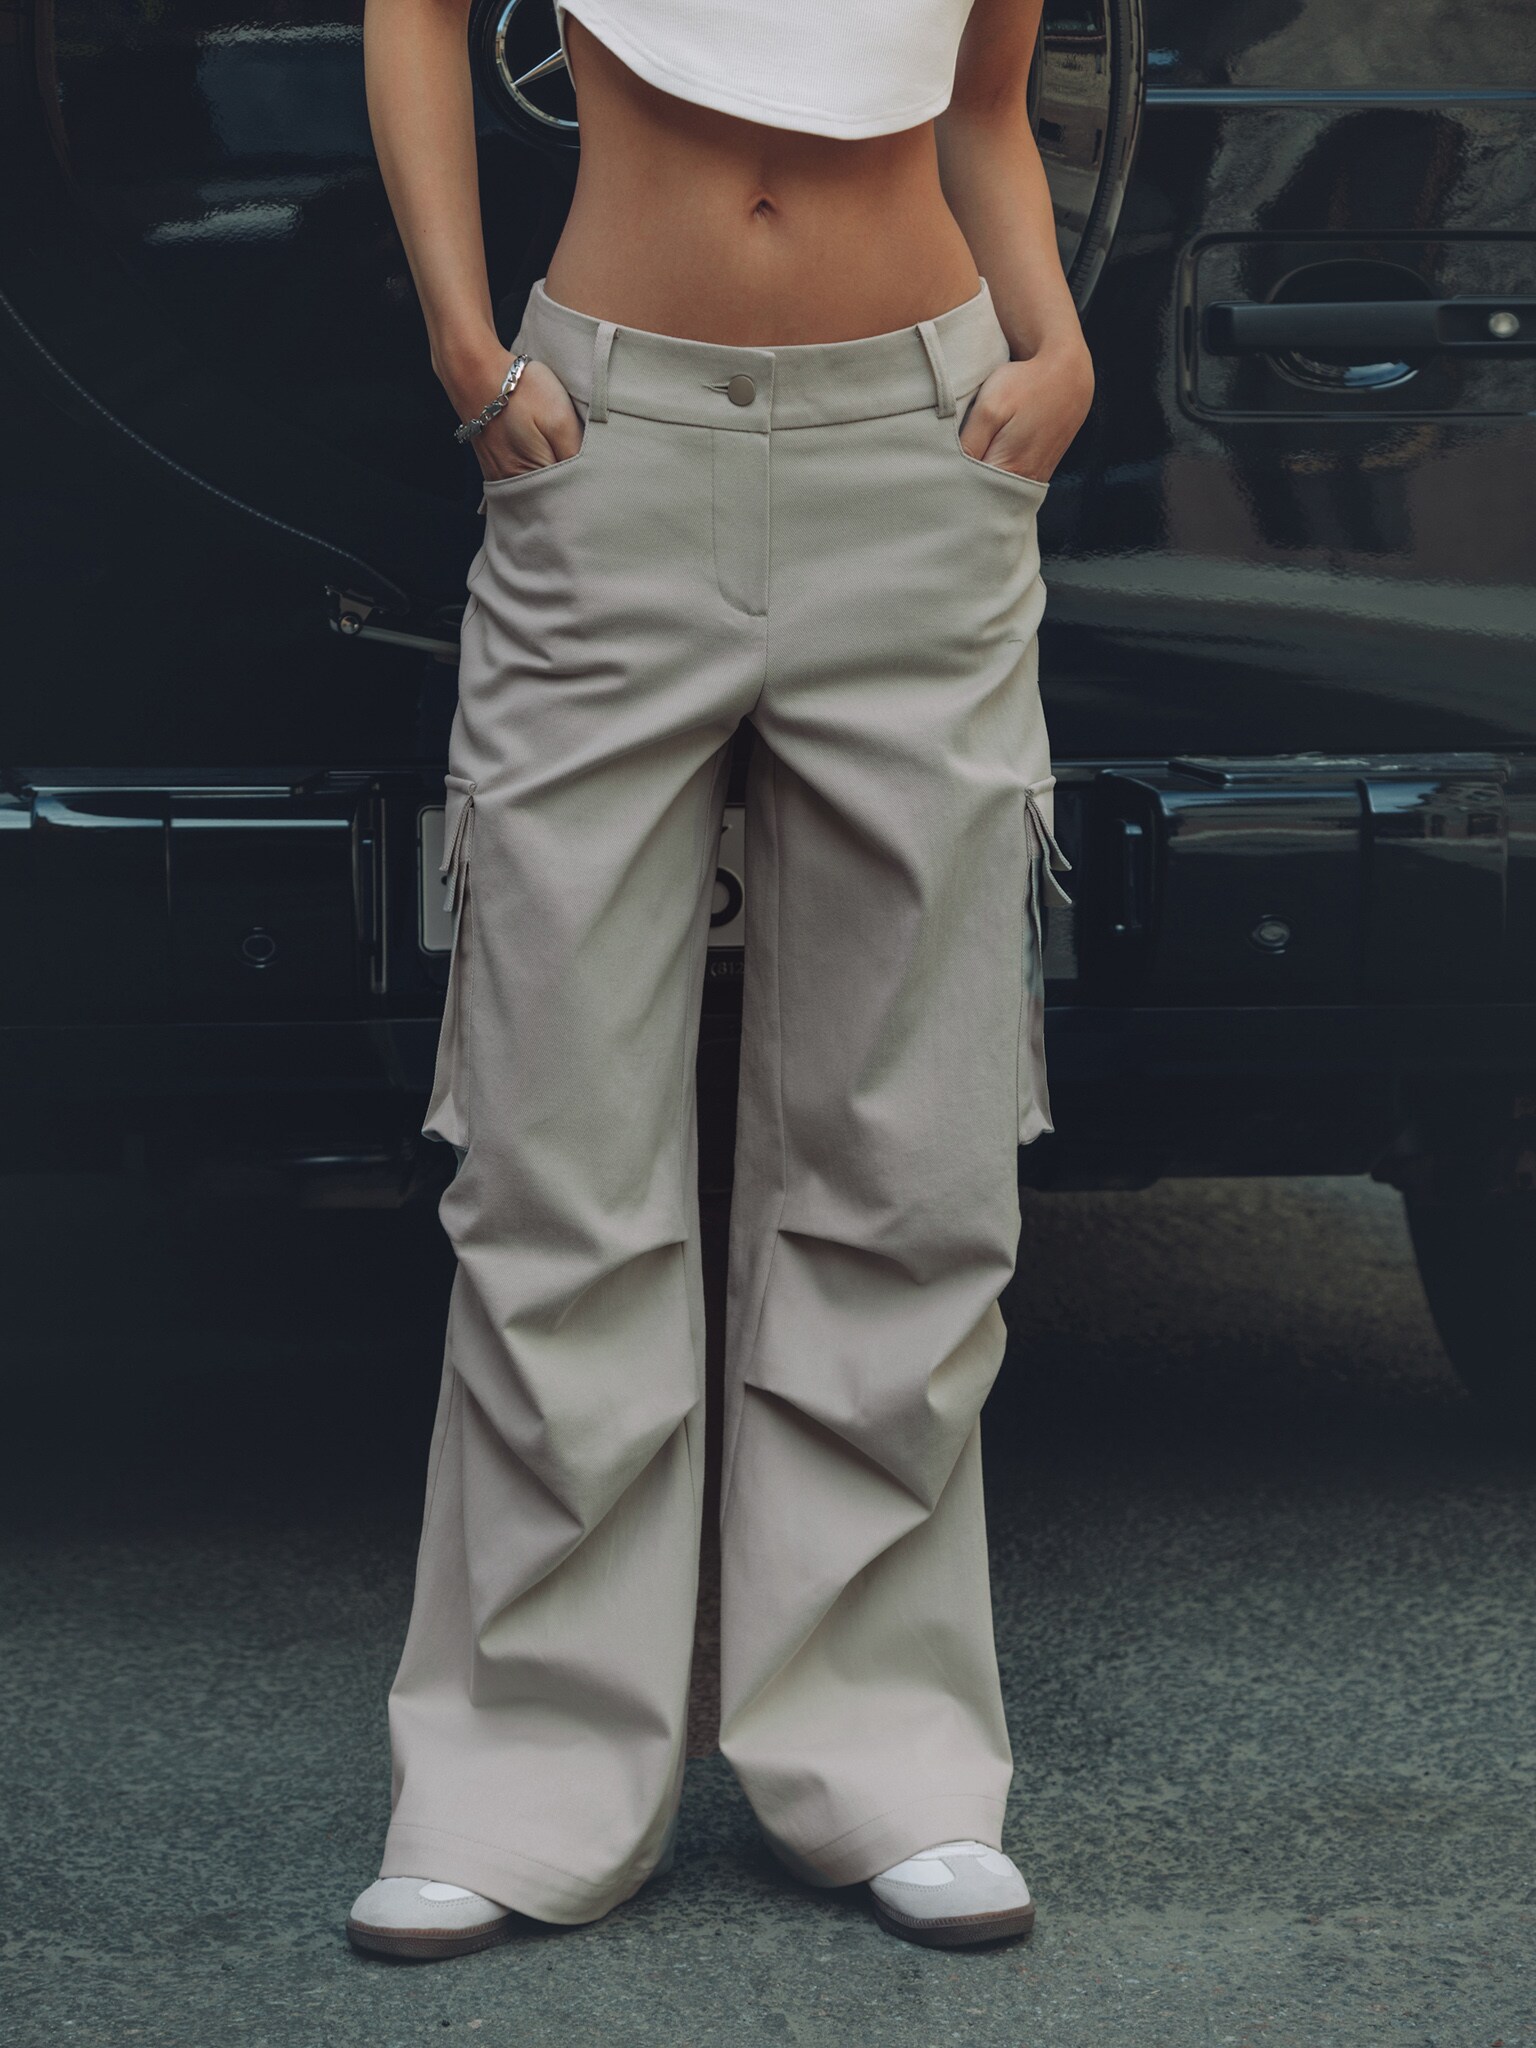 Beige Mid Rise Cargo Pants with Belt Online Shopping